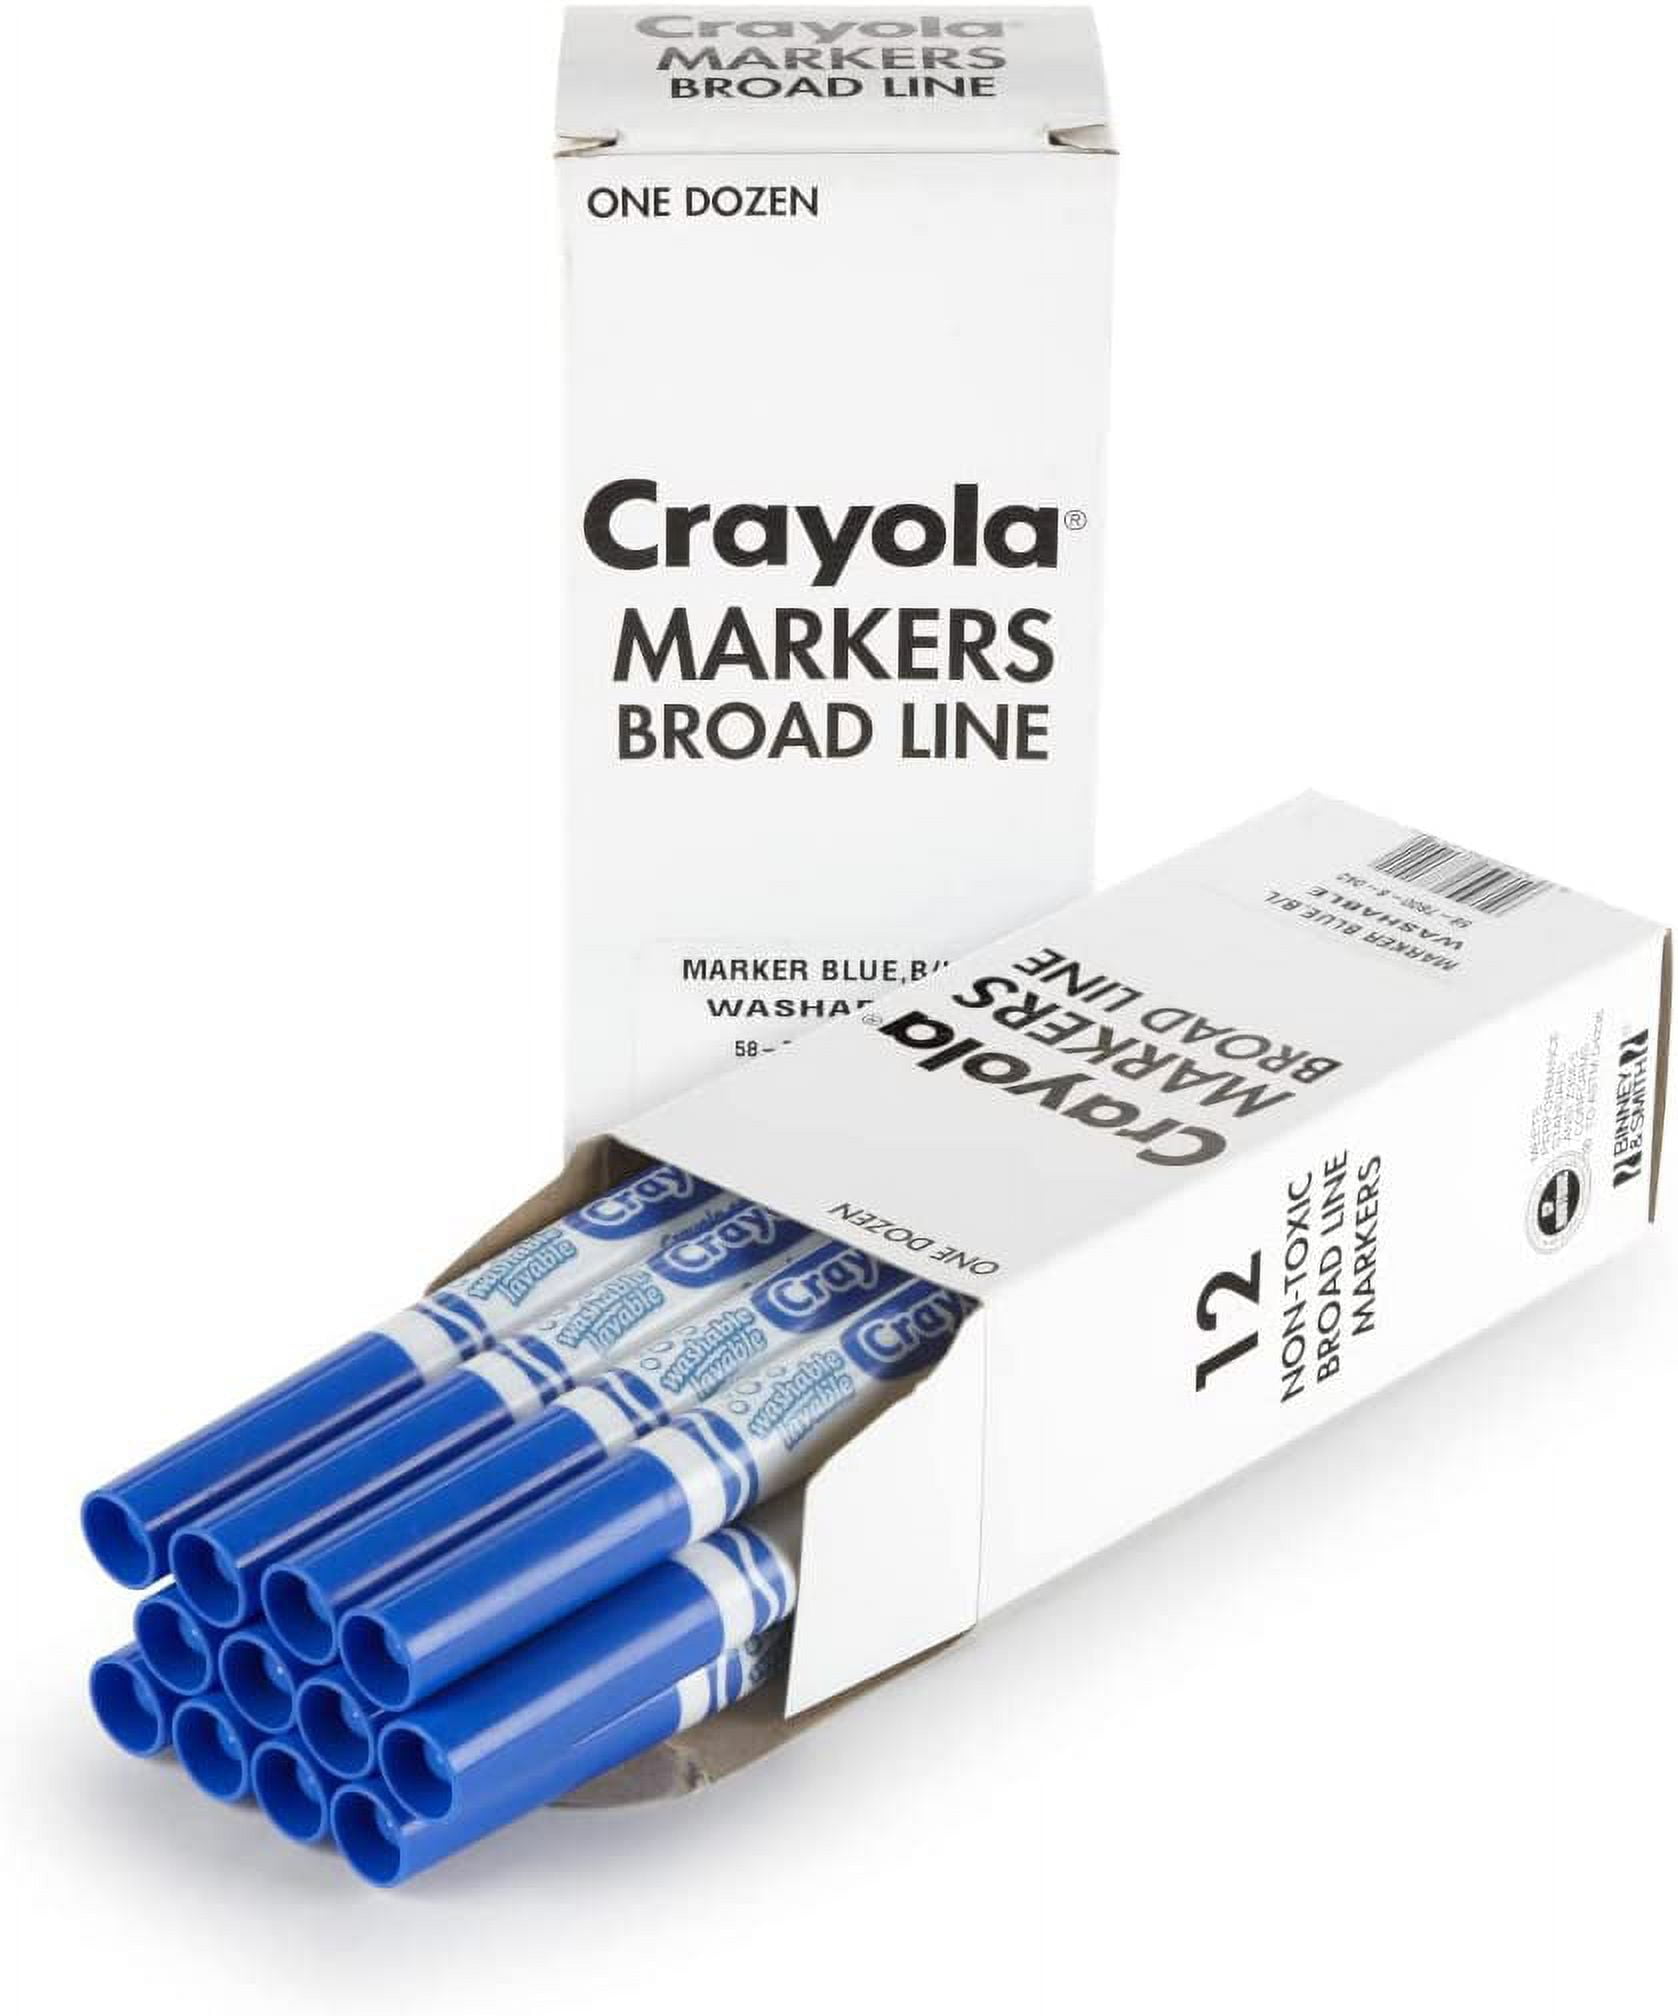 CrayolaBulk Ultra-Clean Washable Markers, Conical Tip, Blue